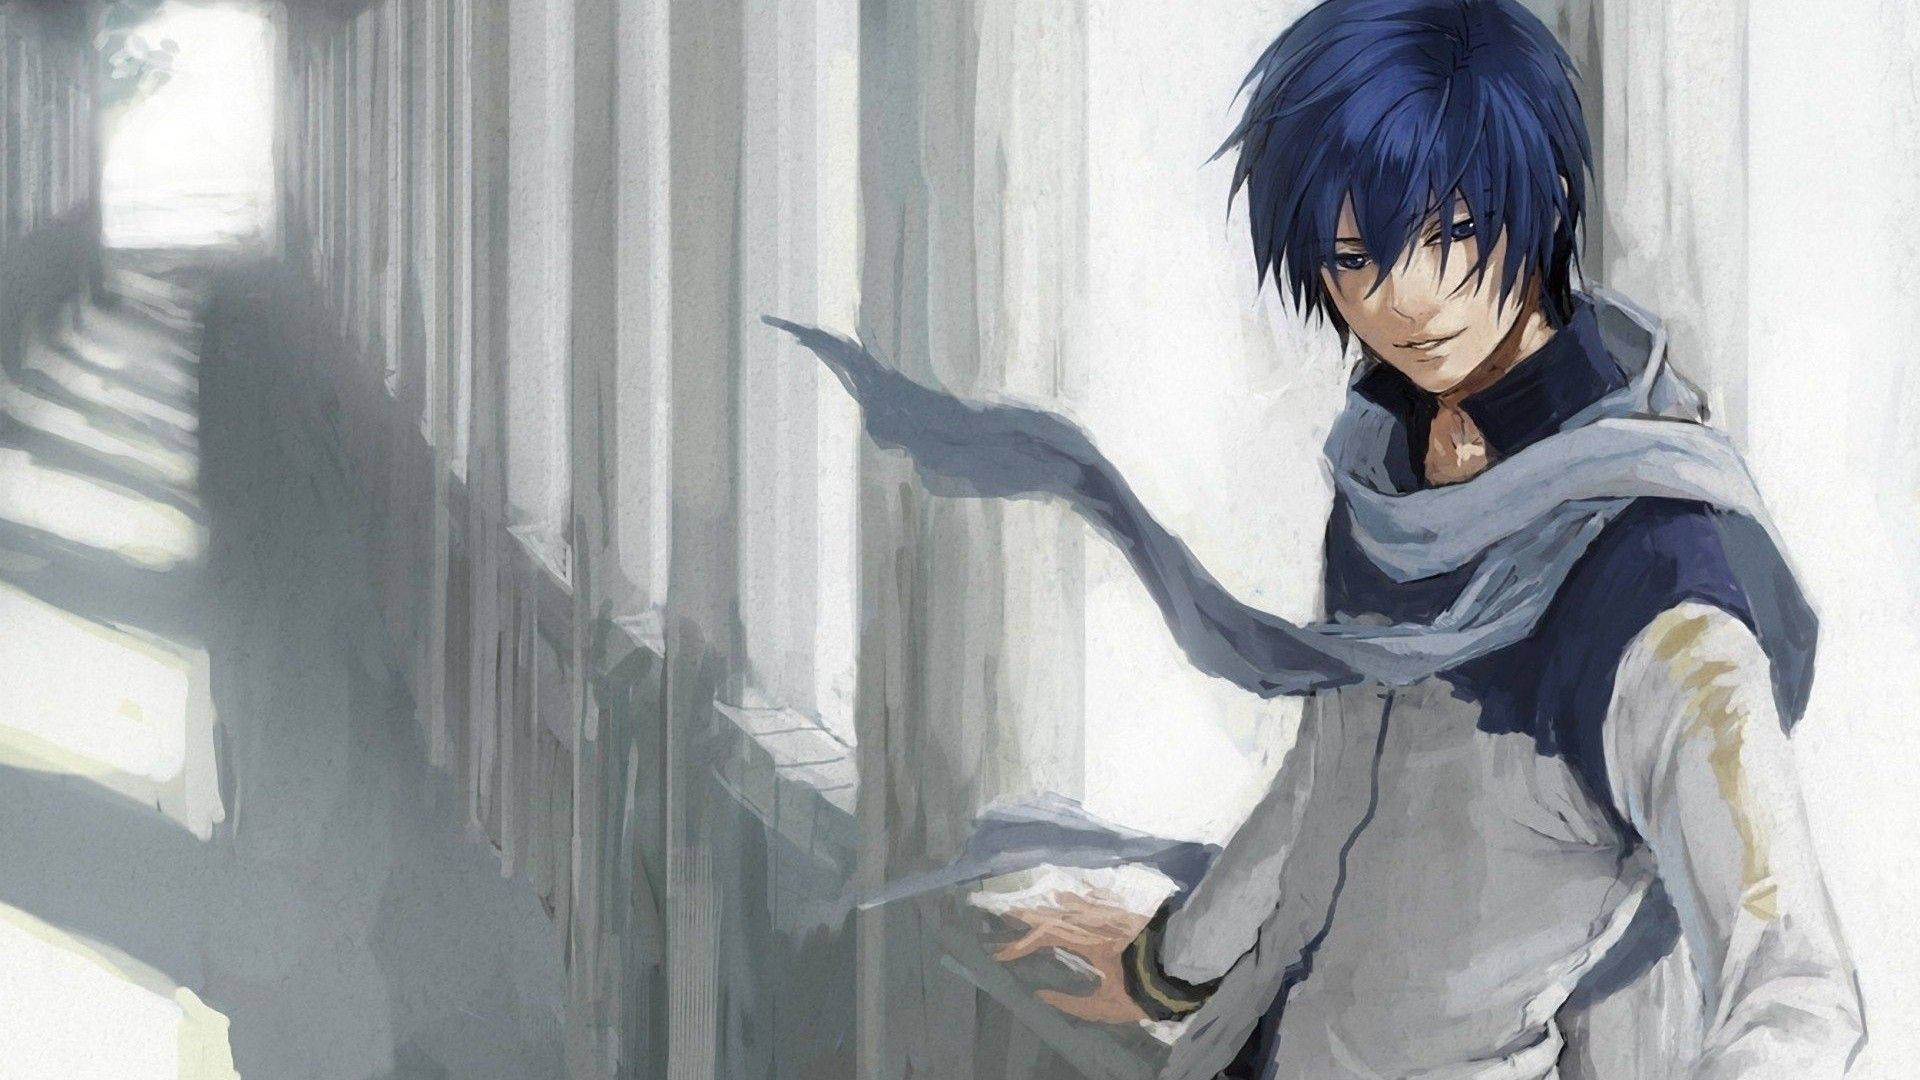 Download Blue-haired Anime Boy Wallpaper 